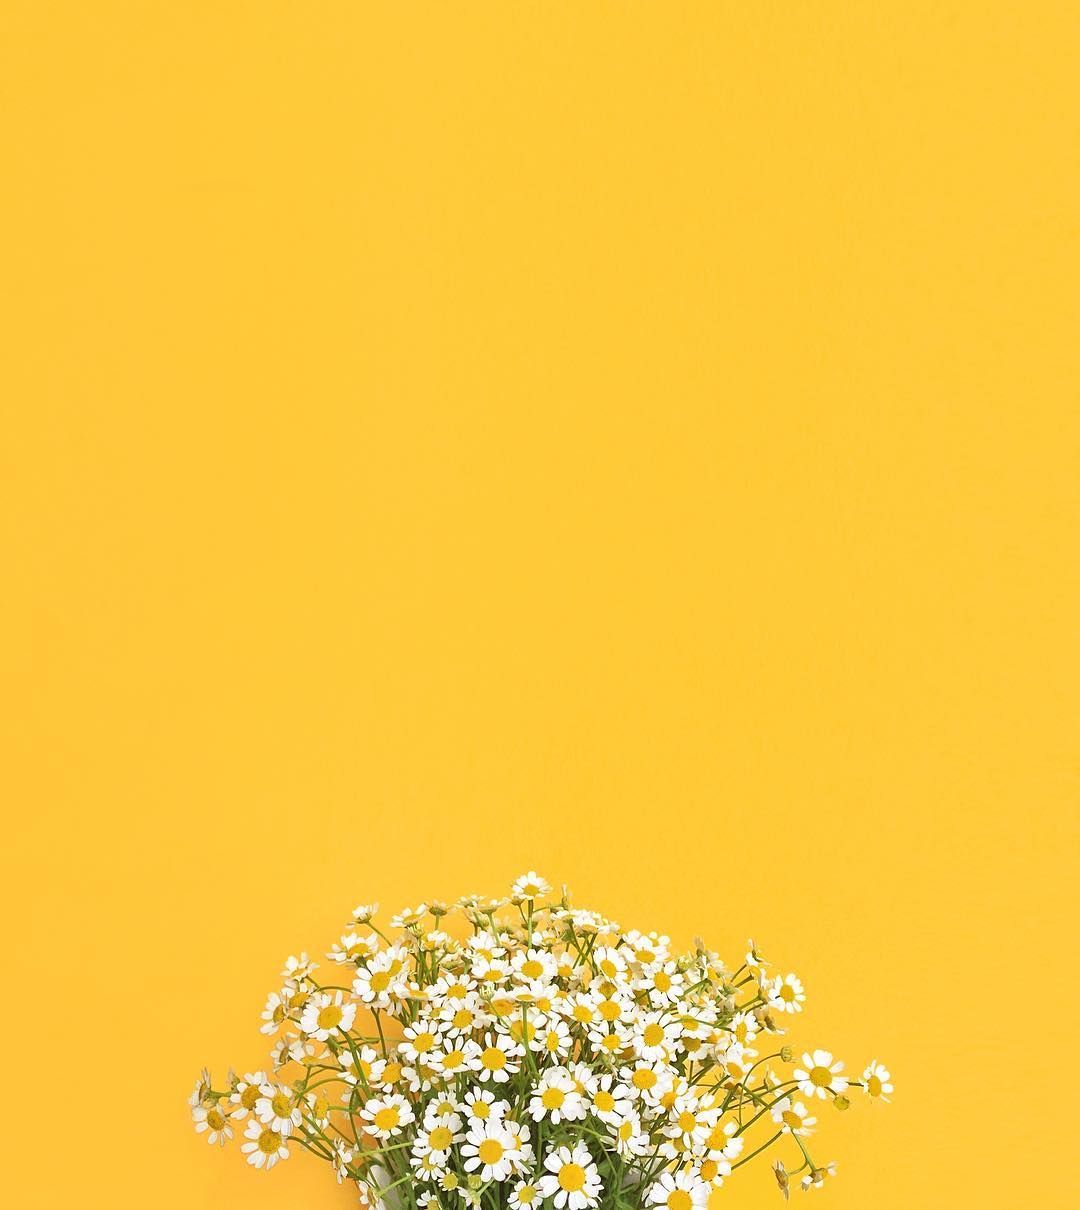 A vase of flowers sitting on top yellow background - Pastel yellow